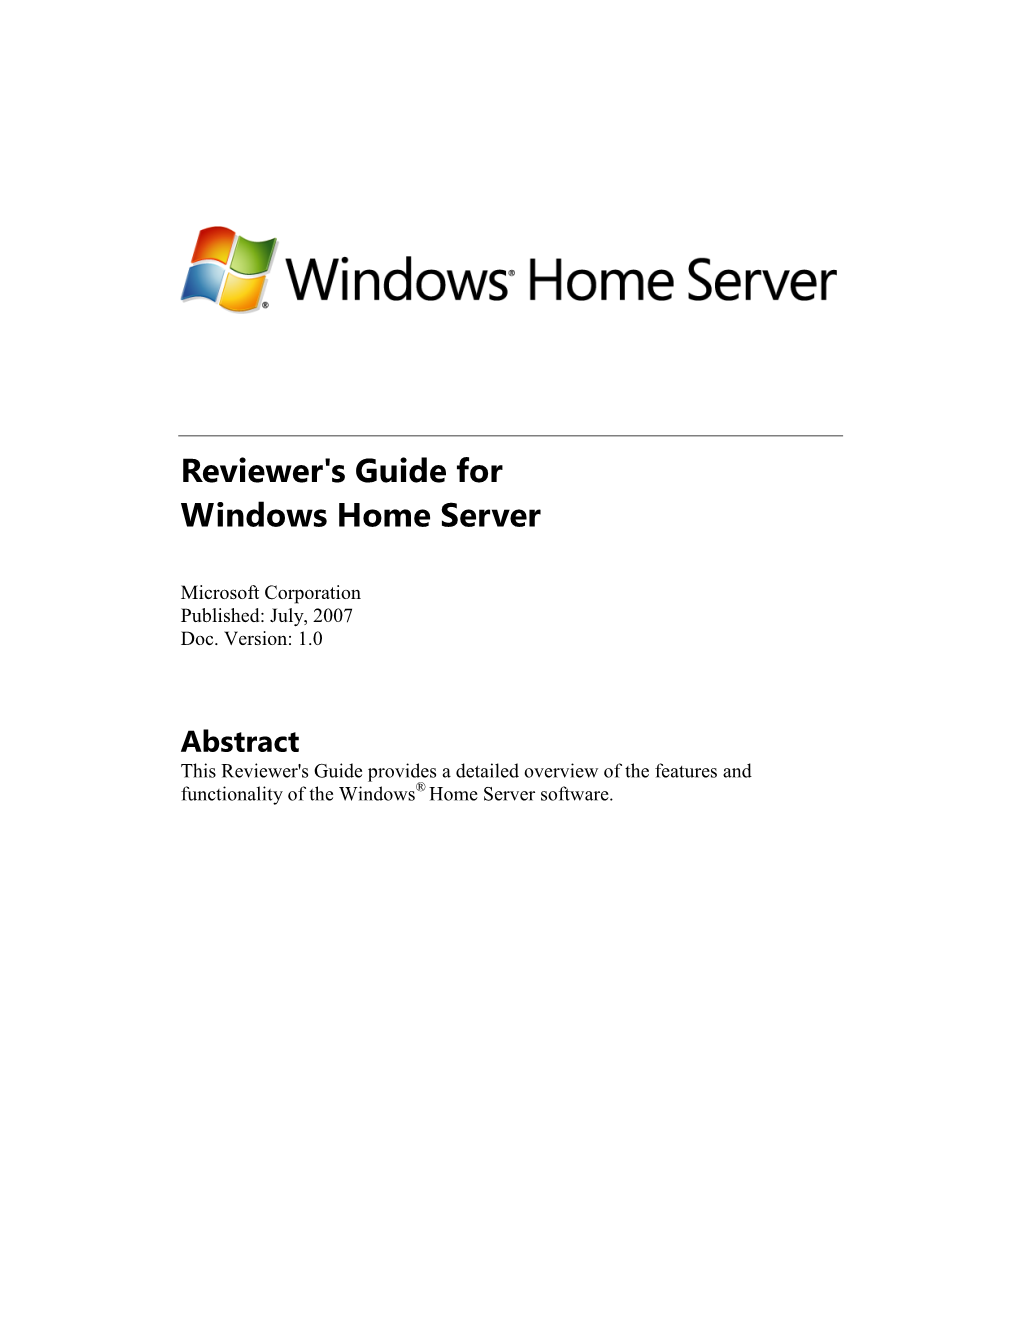 Reviewer's Guide for Windows Home Server